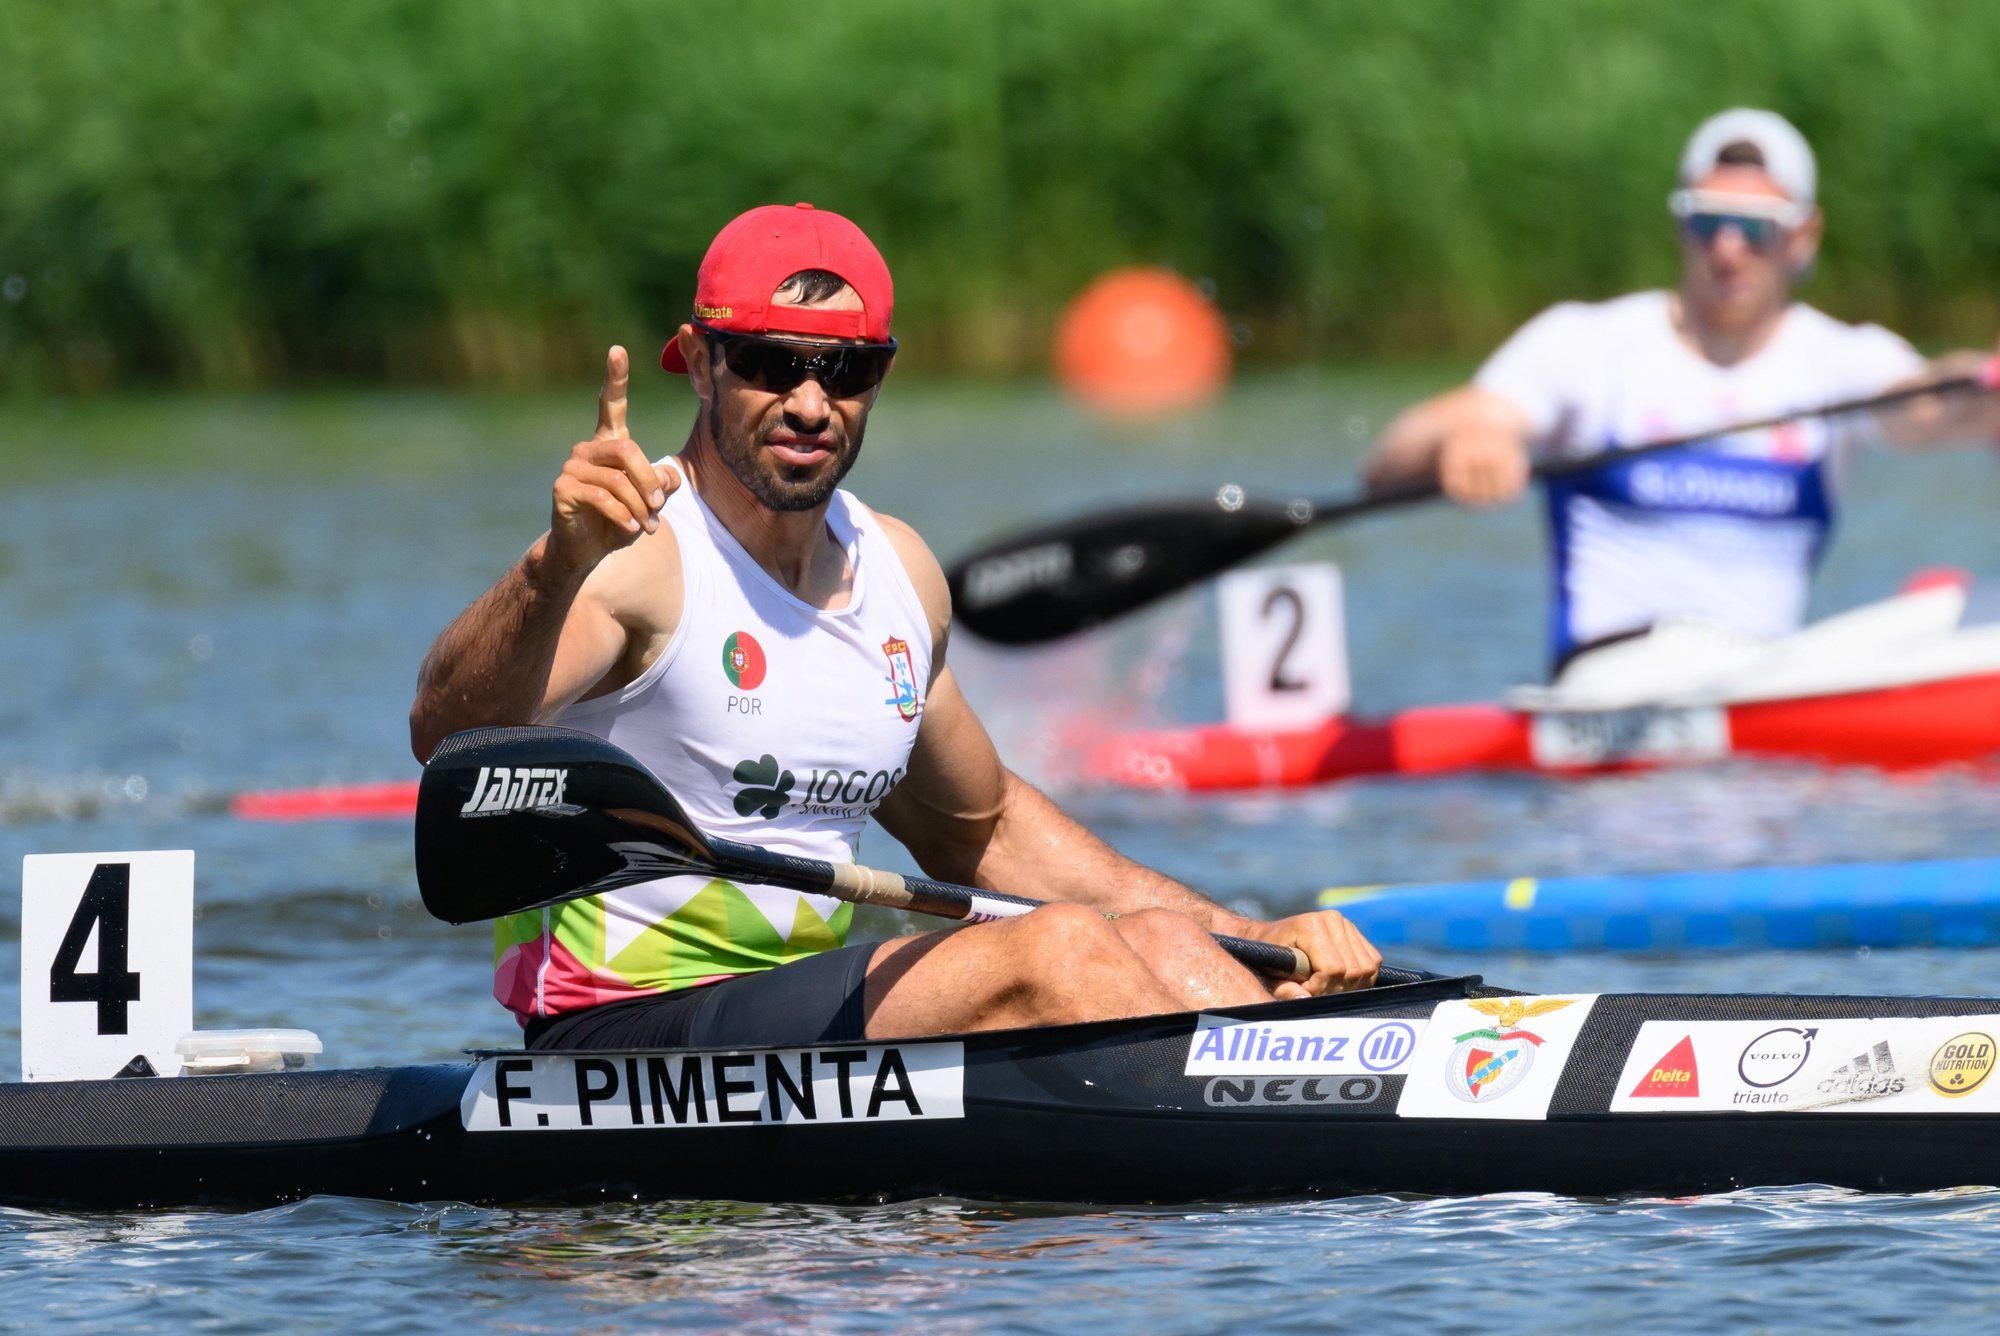 epa11370962 Fernando Pimenta of Portugal competes in the Men&#039;s K1 1000m final race at the ICF Canoe Kayak World Cup in Poznan, Poland, 26 May 2021.  EPA/Jakub Kaczmarczyk POLAND OUT